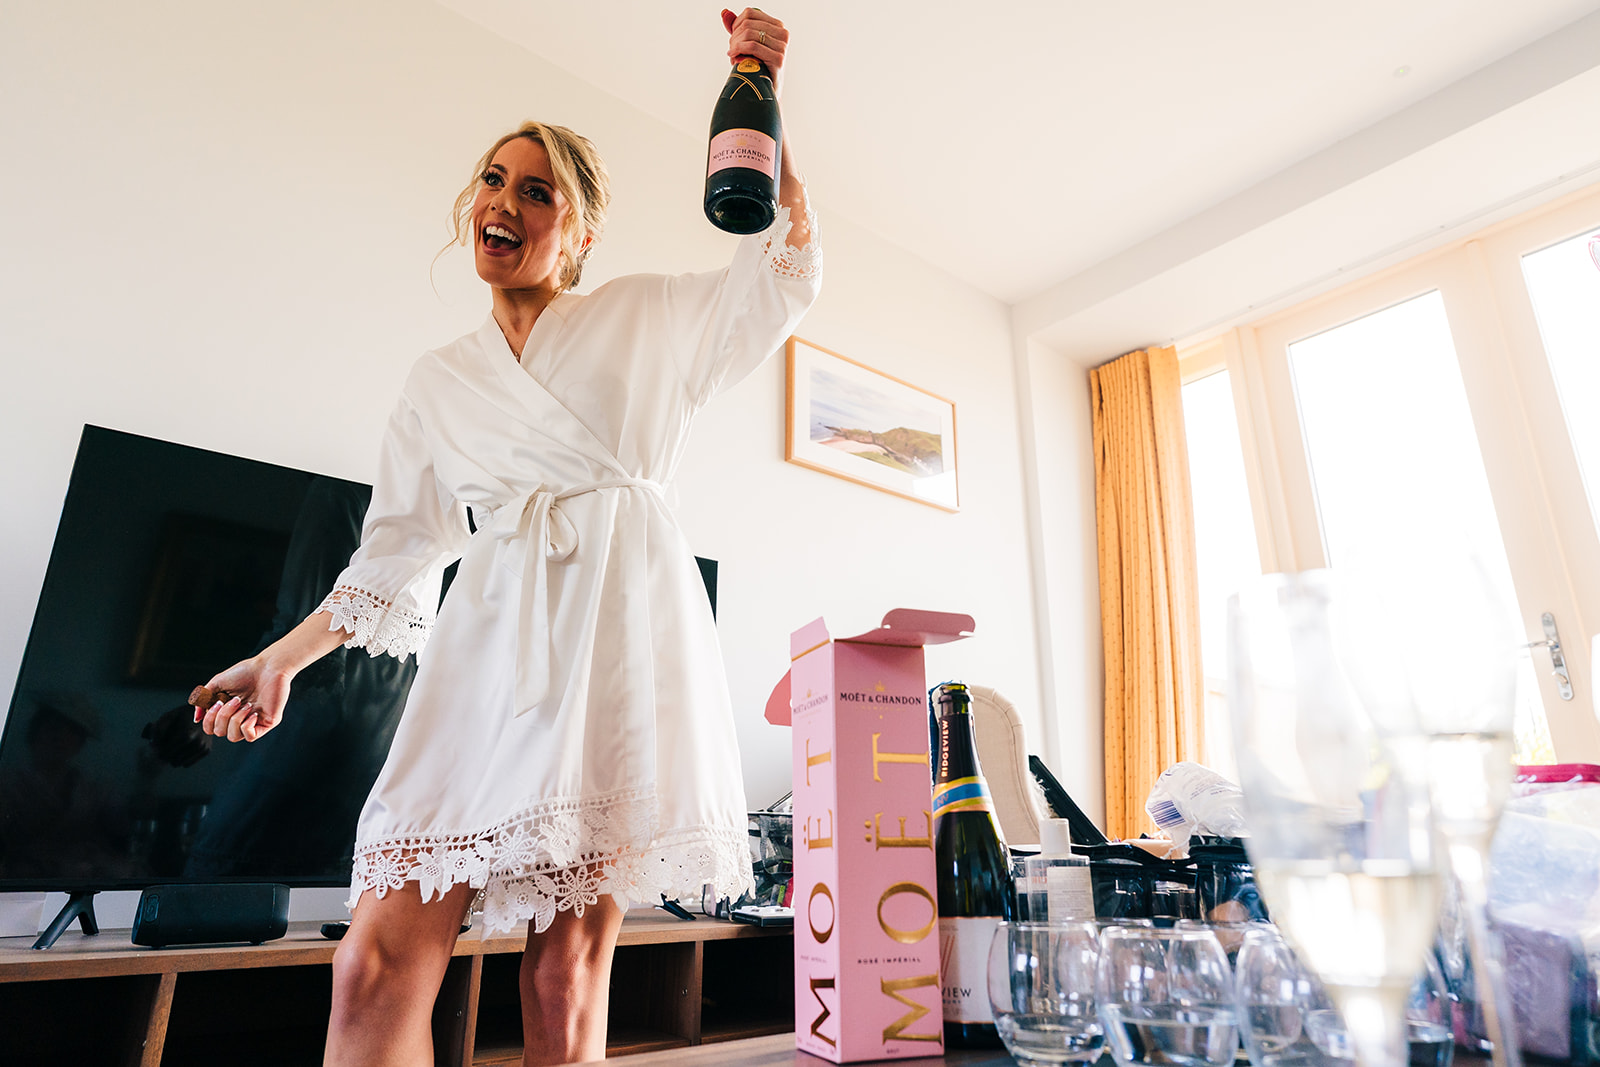 The bride popping the champagne bottle on the morning of her wedding